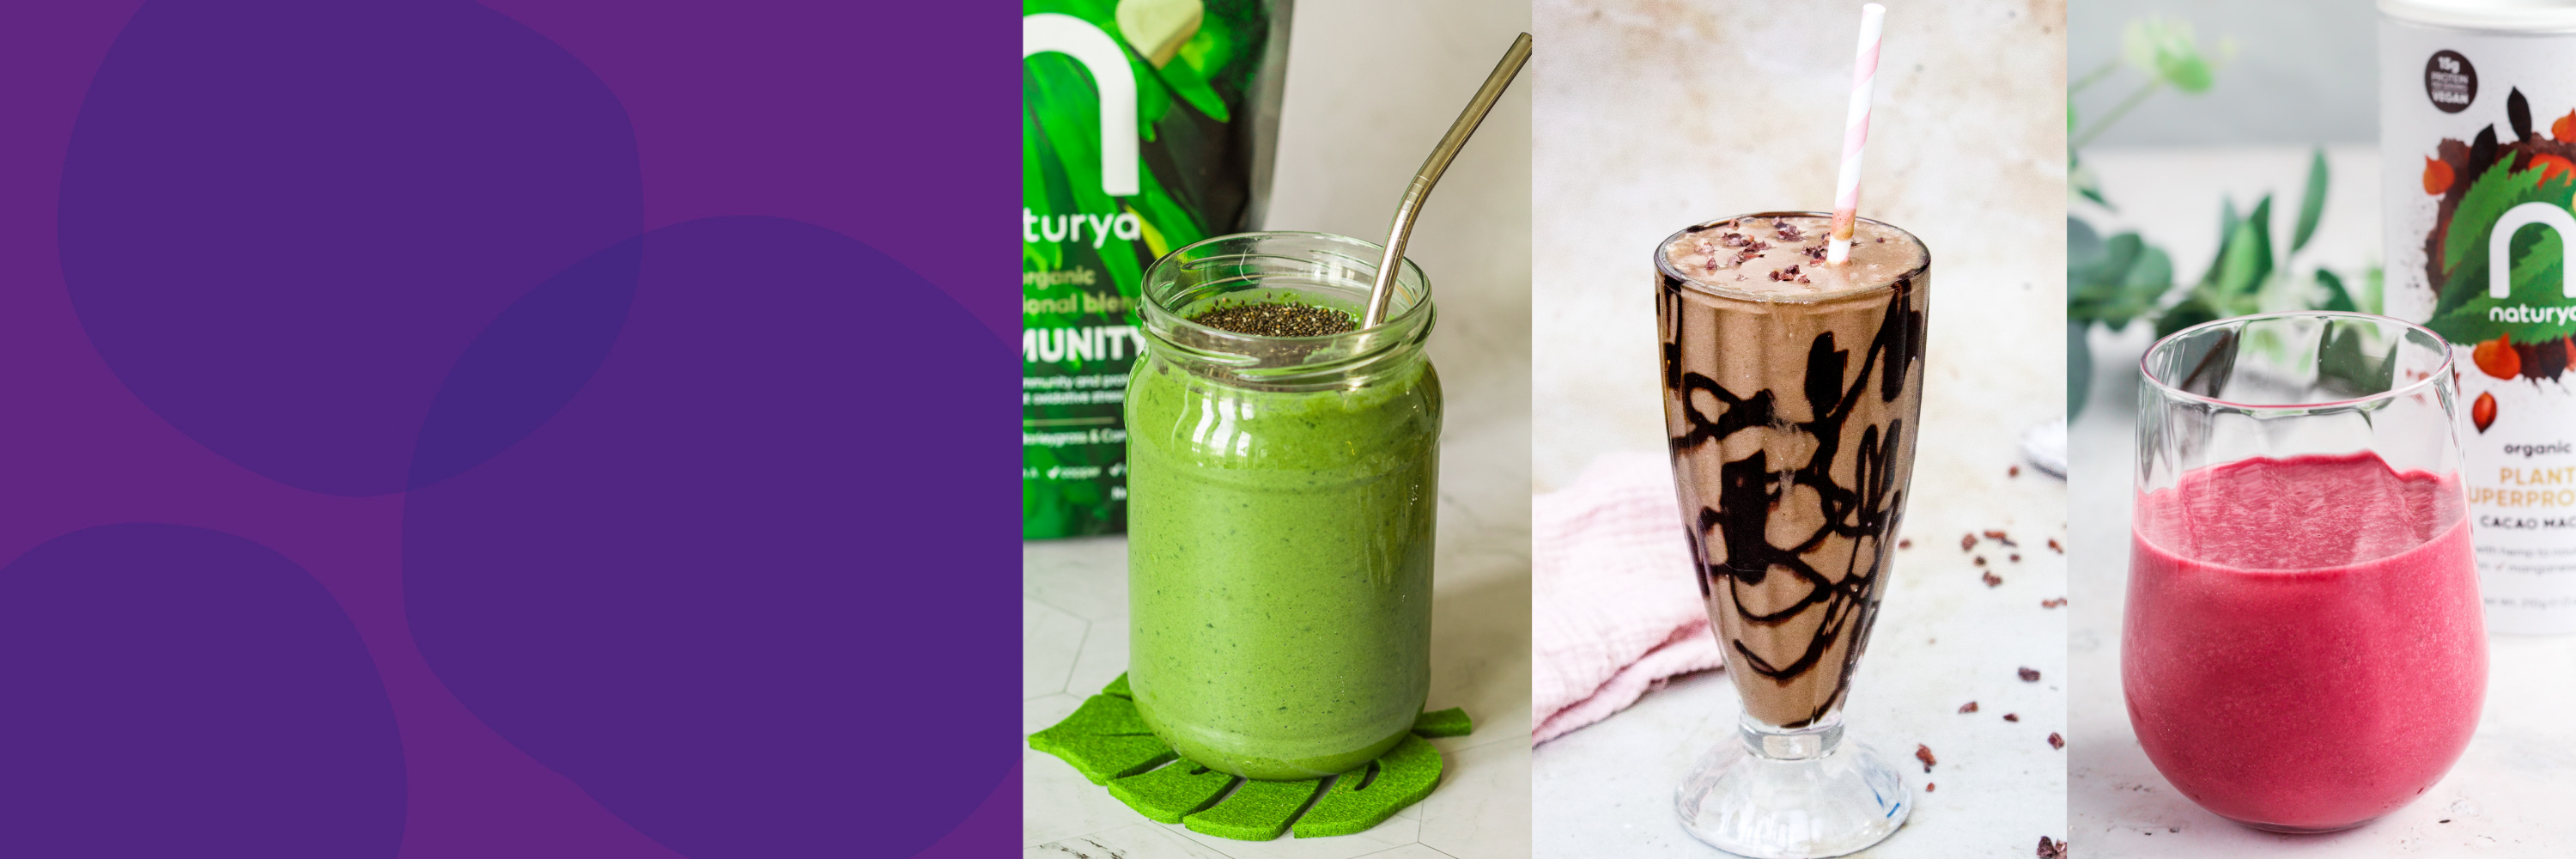 Sign up to Naturya's newsletter to receive a free superfood smoothie eBook!